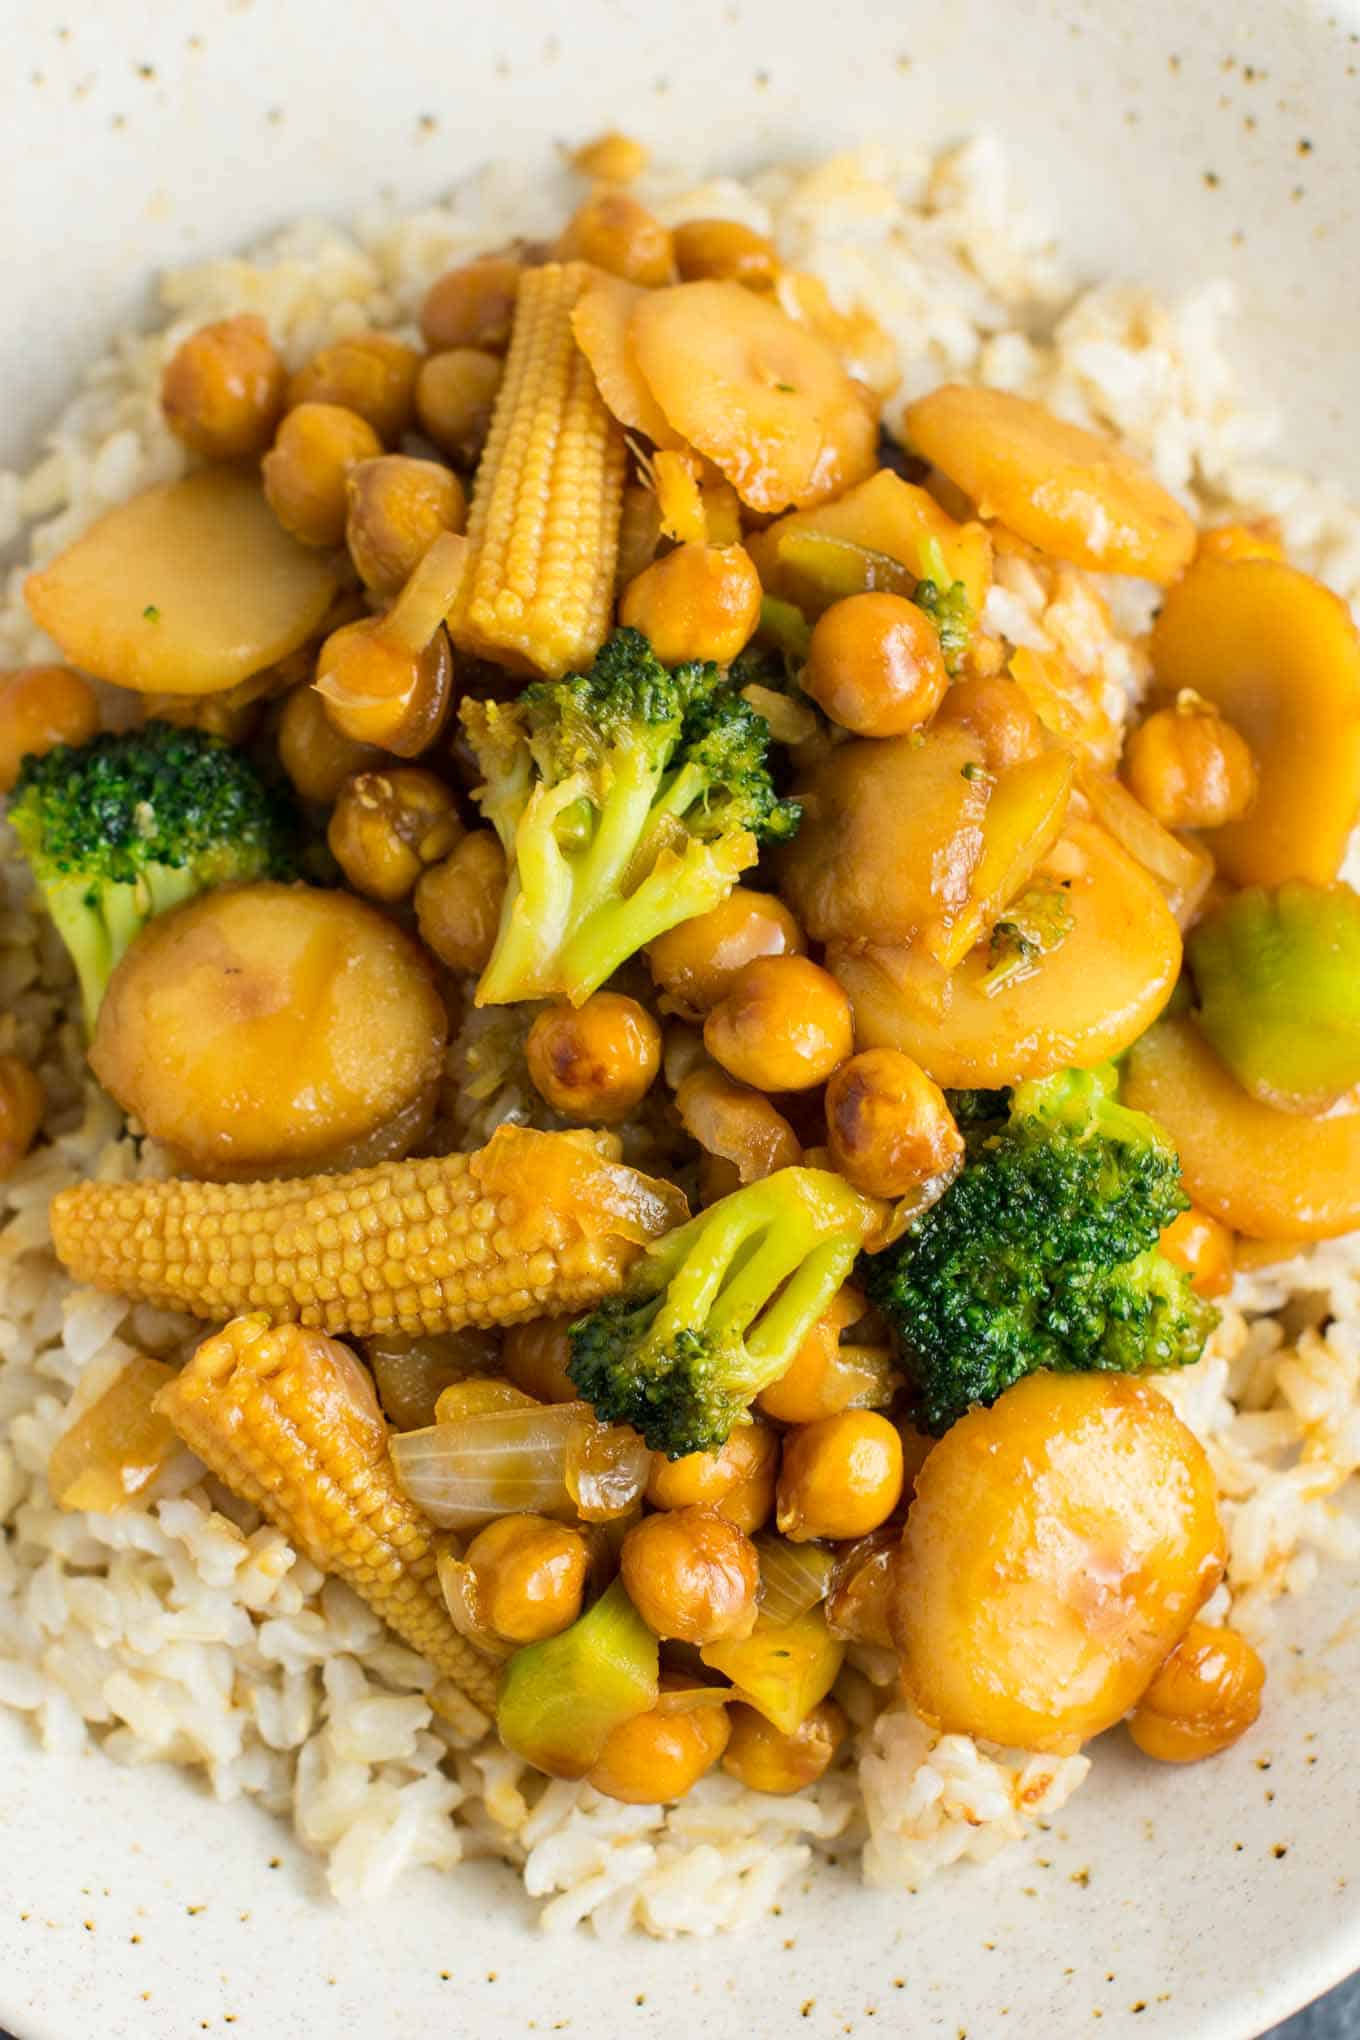 This easy vegan chickpea stirfry bowl with brown rice will be a hit with the whole family! #vegan #veganstirfry #chickpeastirfry #vegandinner